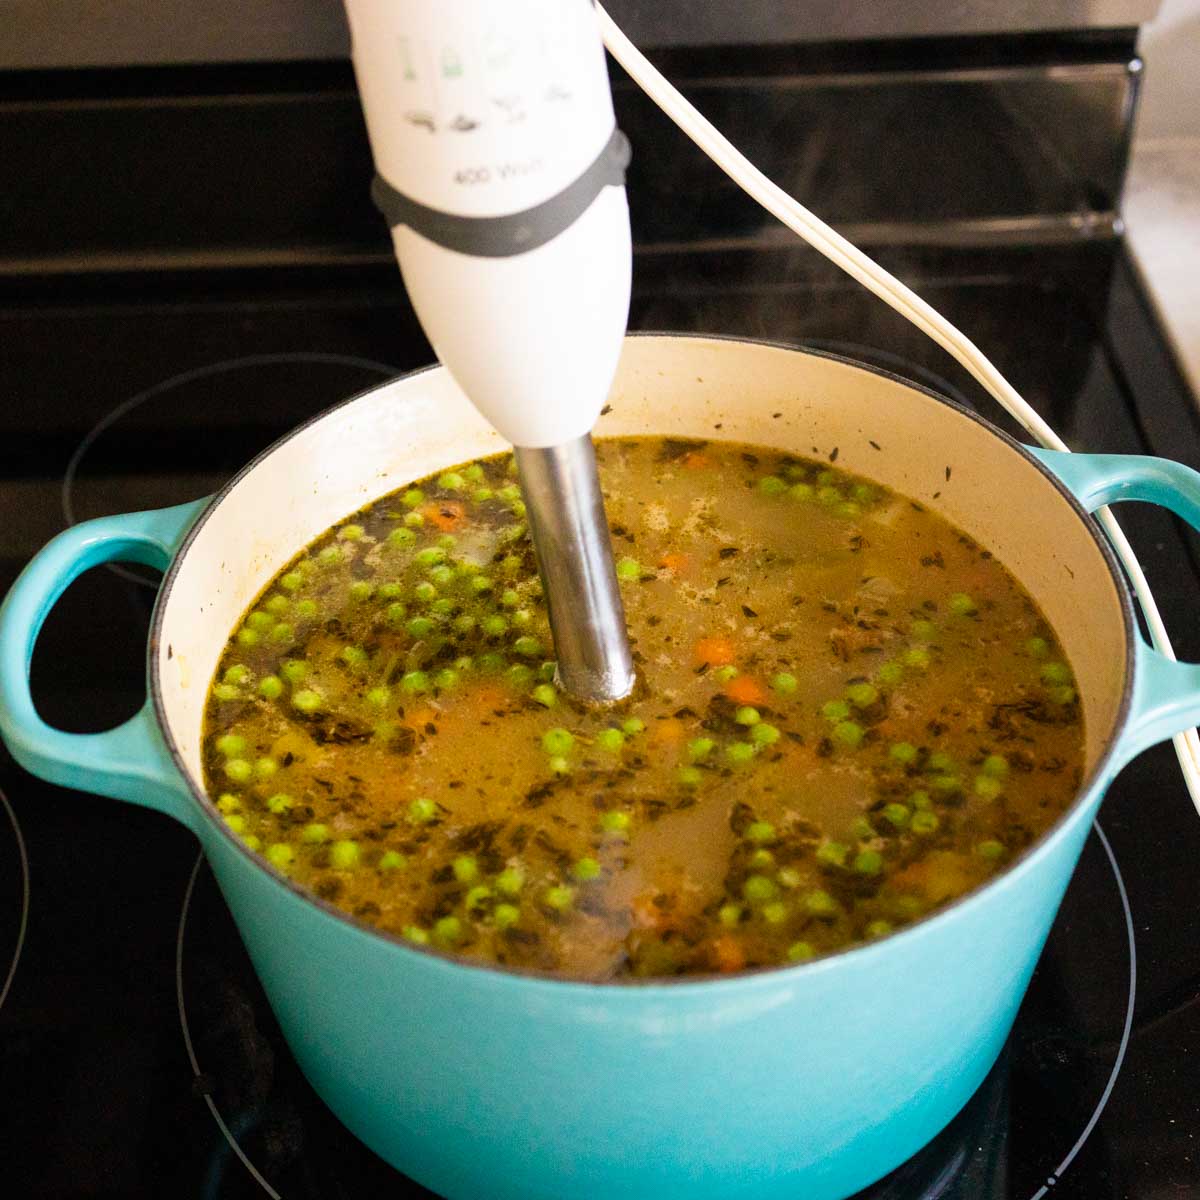 An immersion blender is pureeing the soup. Seasonings are floating on the top of the broth.